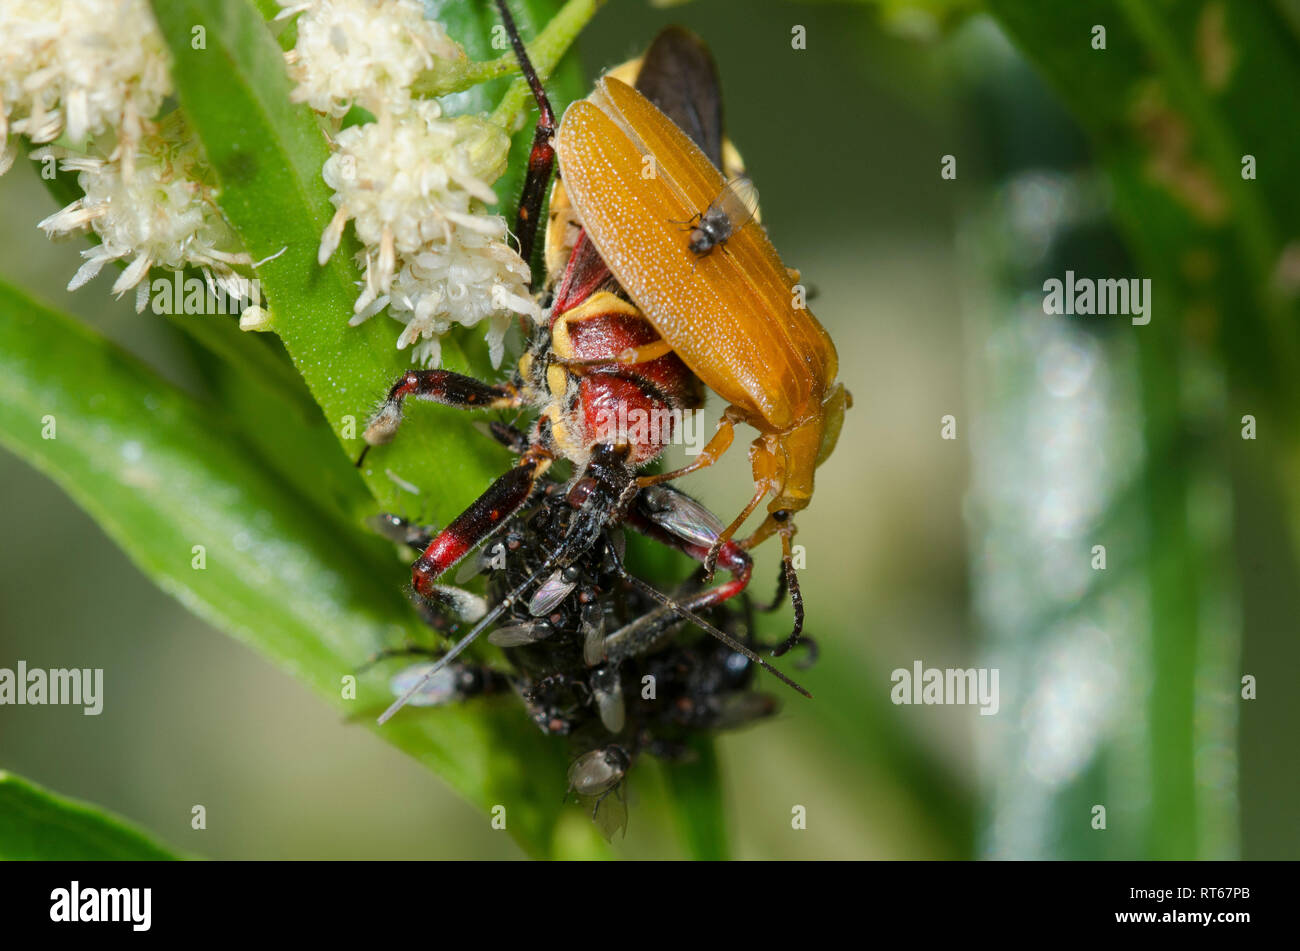 Yellow-bellied Bee Assassin, Apiomerus flaviventris, with prey and Freeloader Flies, Family Milichiidae, on Seep-willow, Baccharis salicifolia Stock Photo